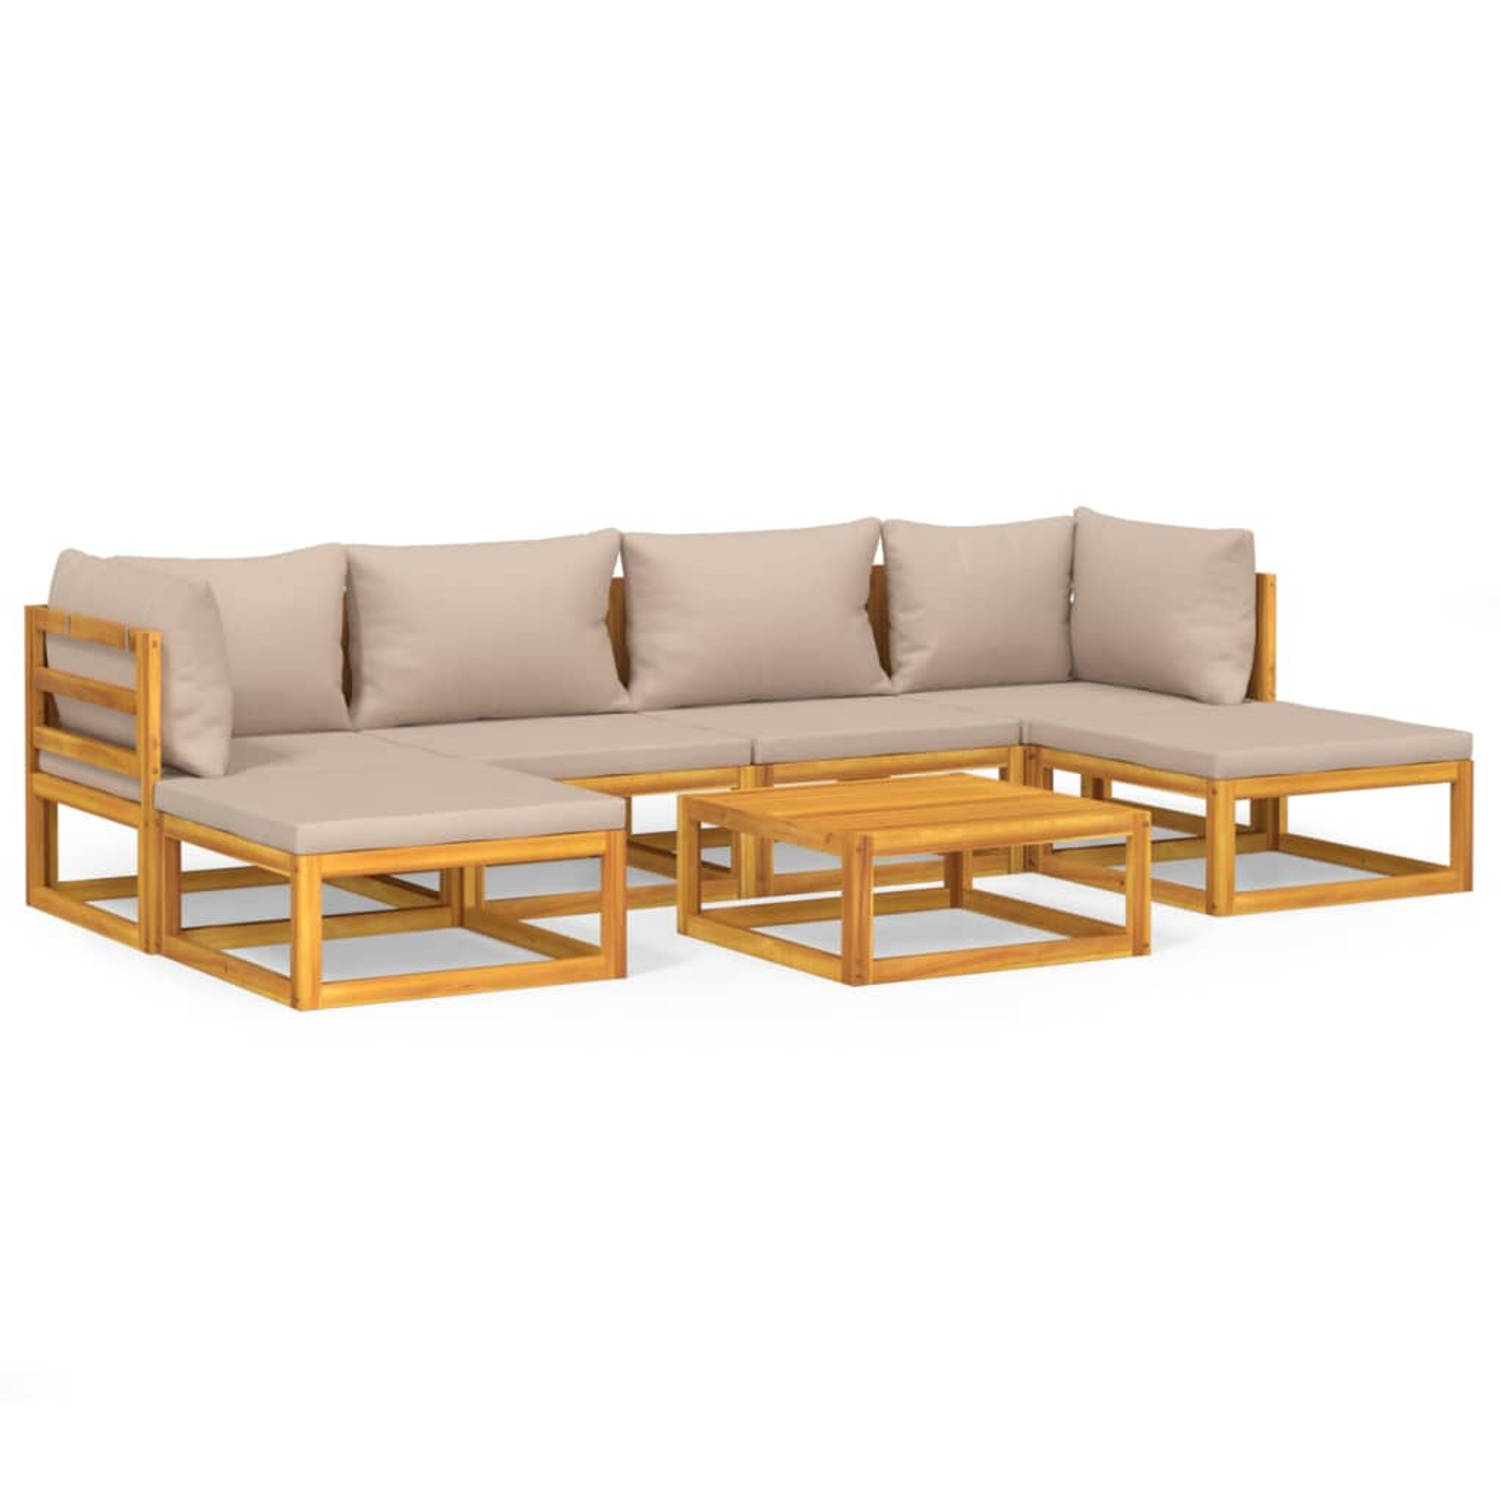 The Living Store 7-delige Loungeset met kussens massief hout taupe - Tuinset